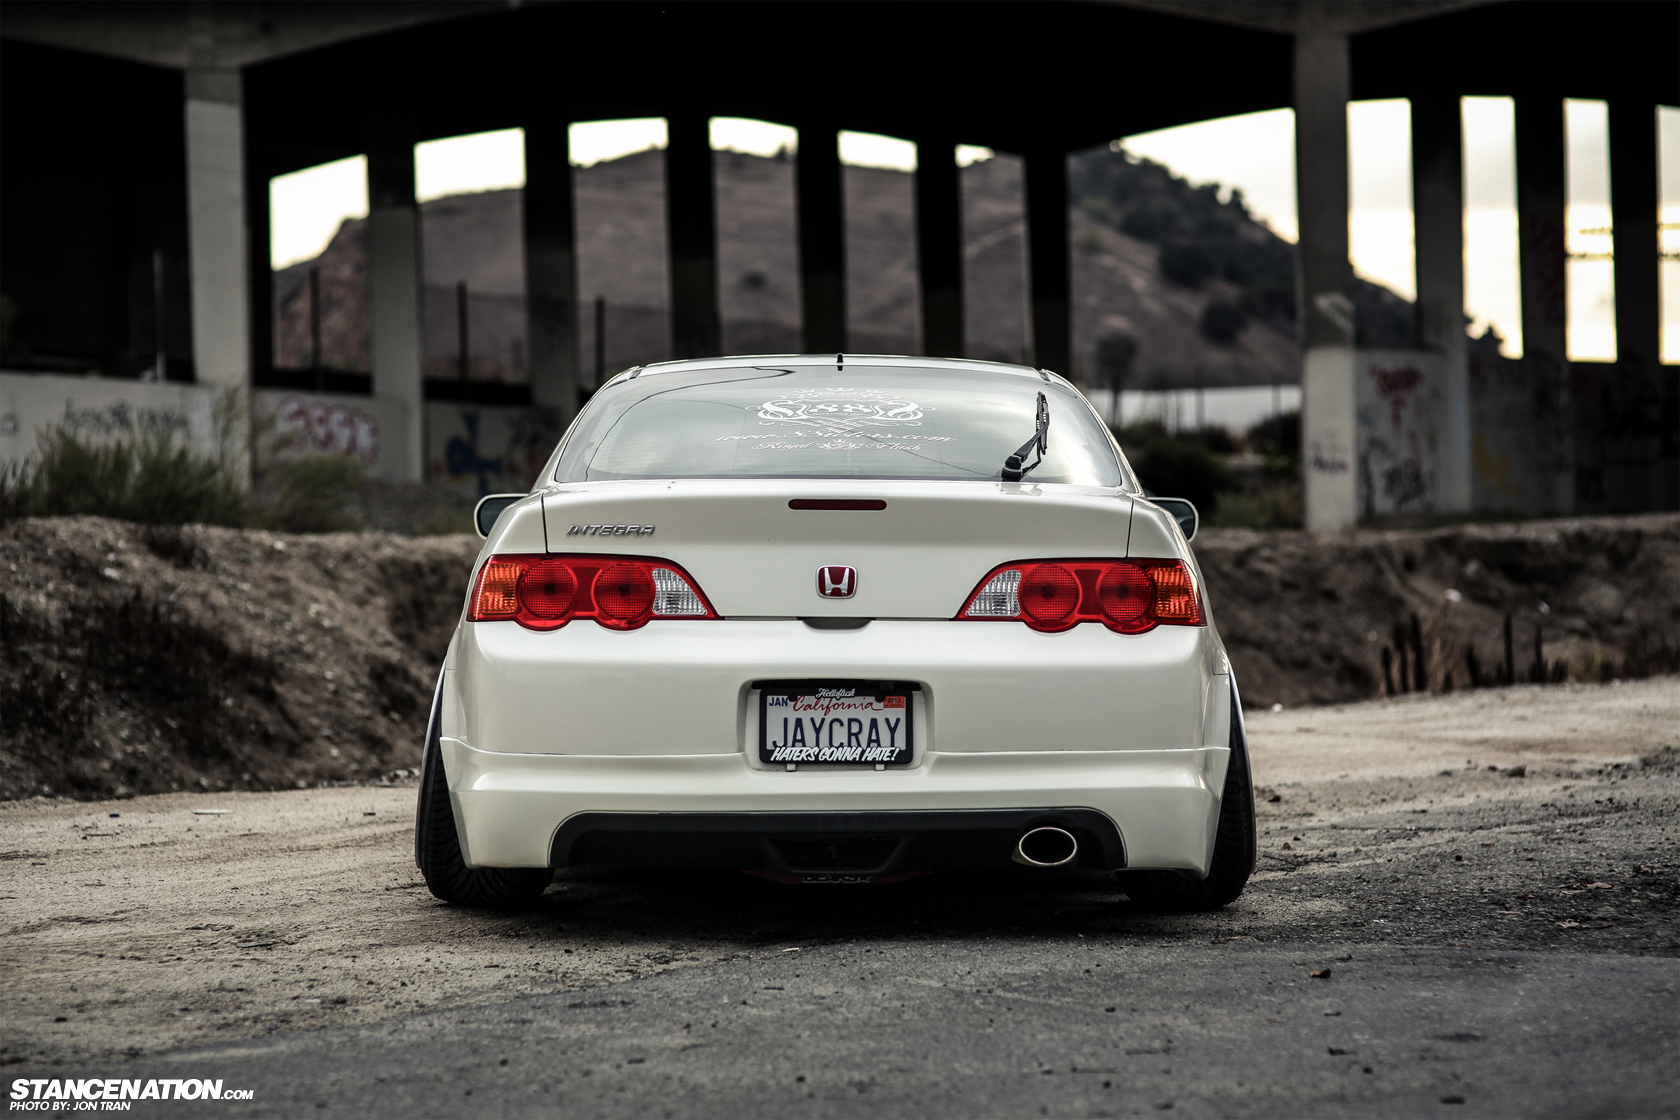 Dumped & Fitted // Jerald's Bagged Acura RSX. | Stance:Nation ...